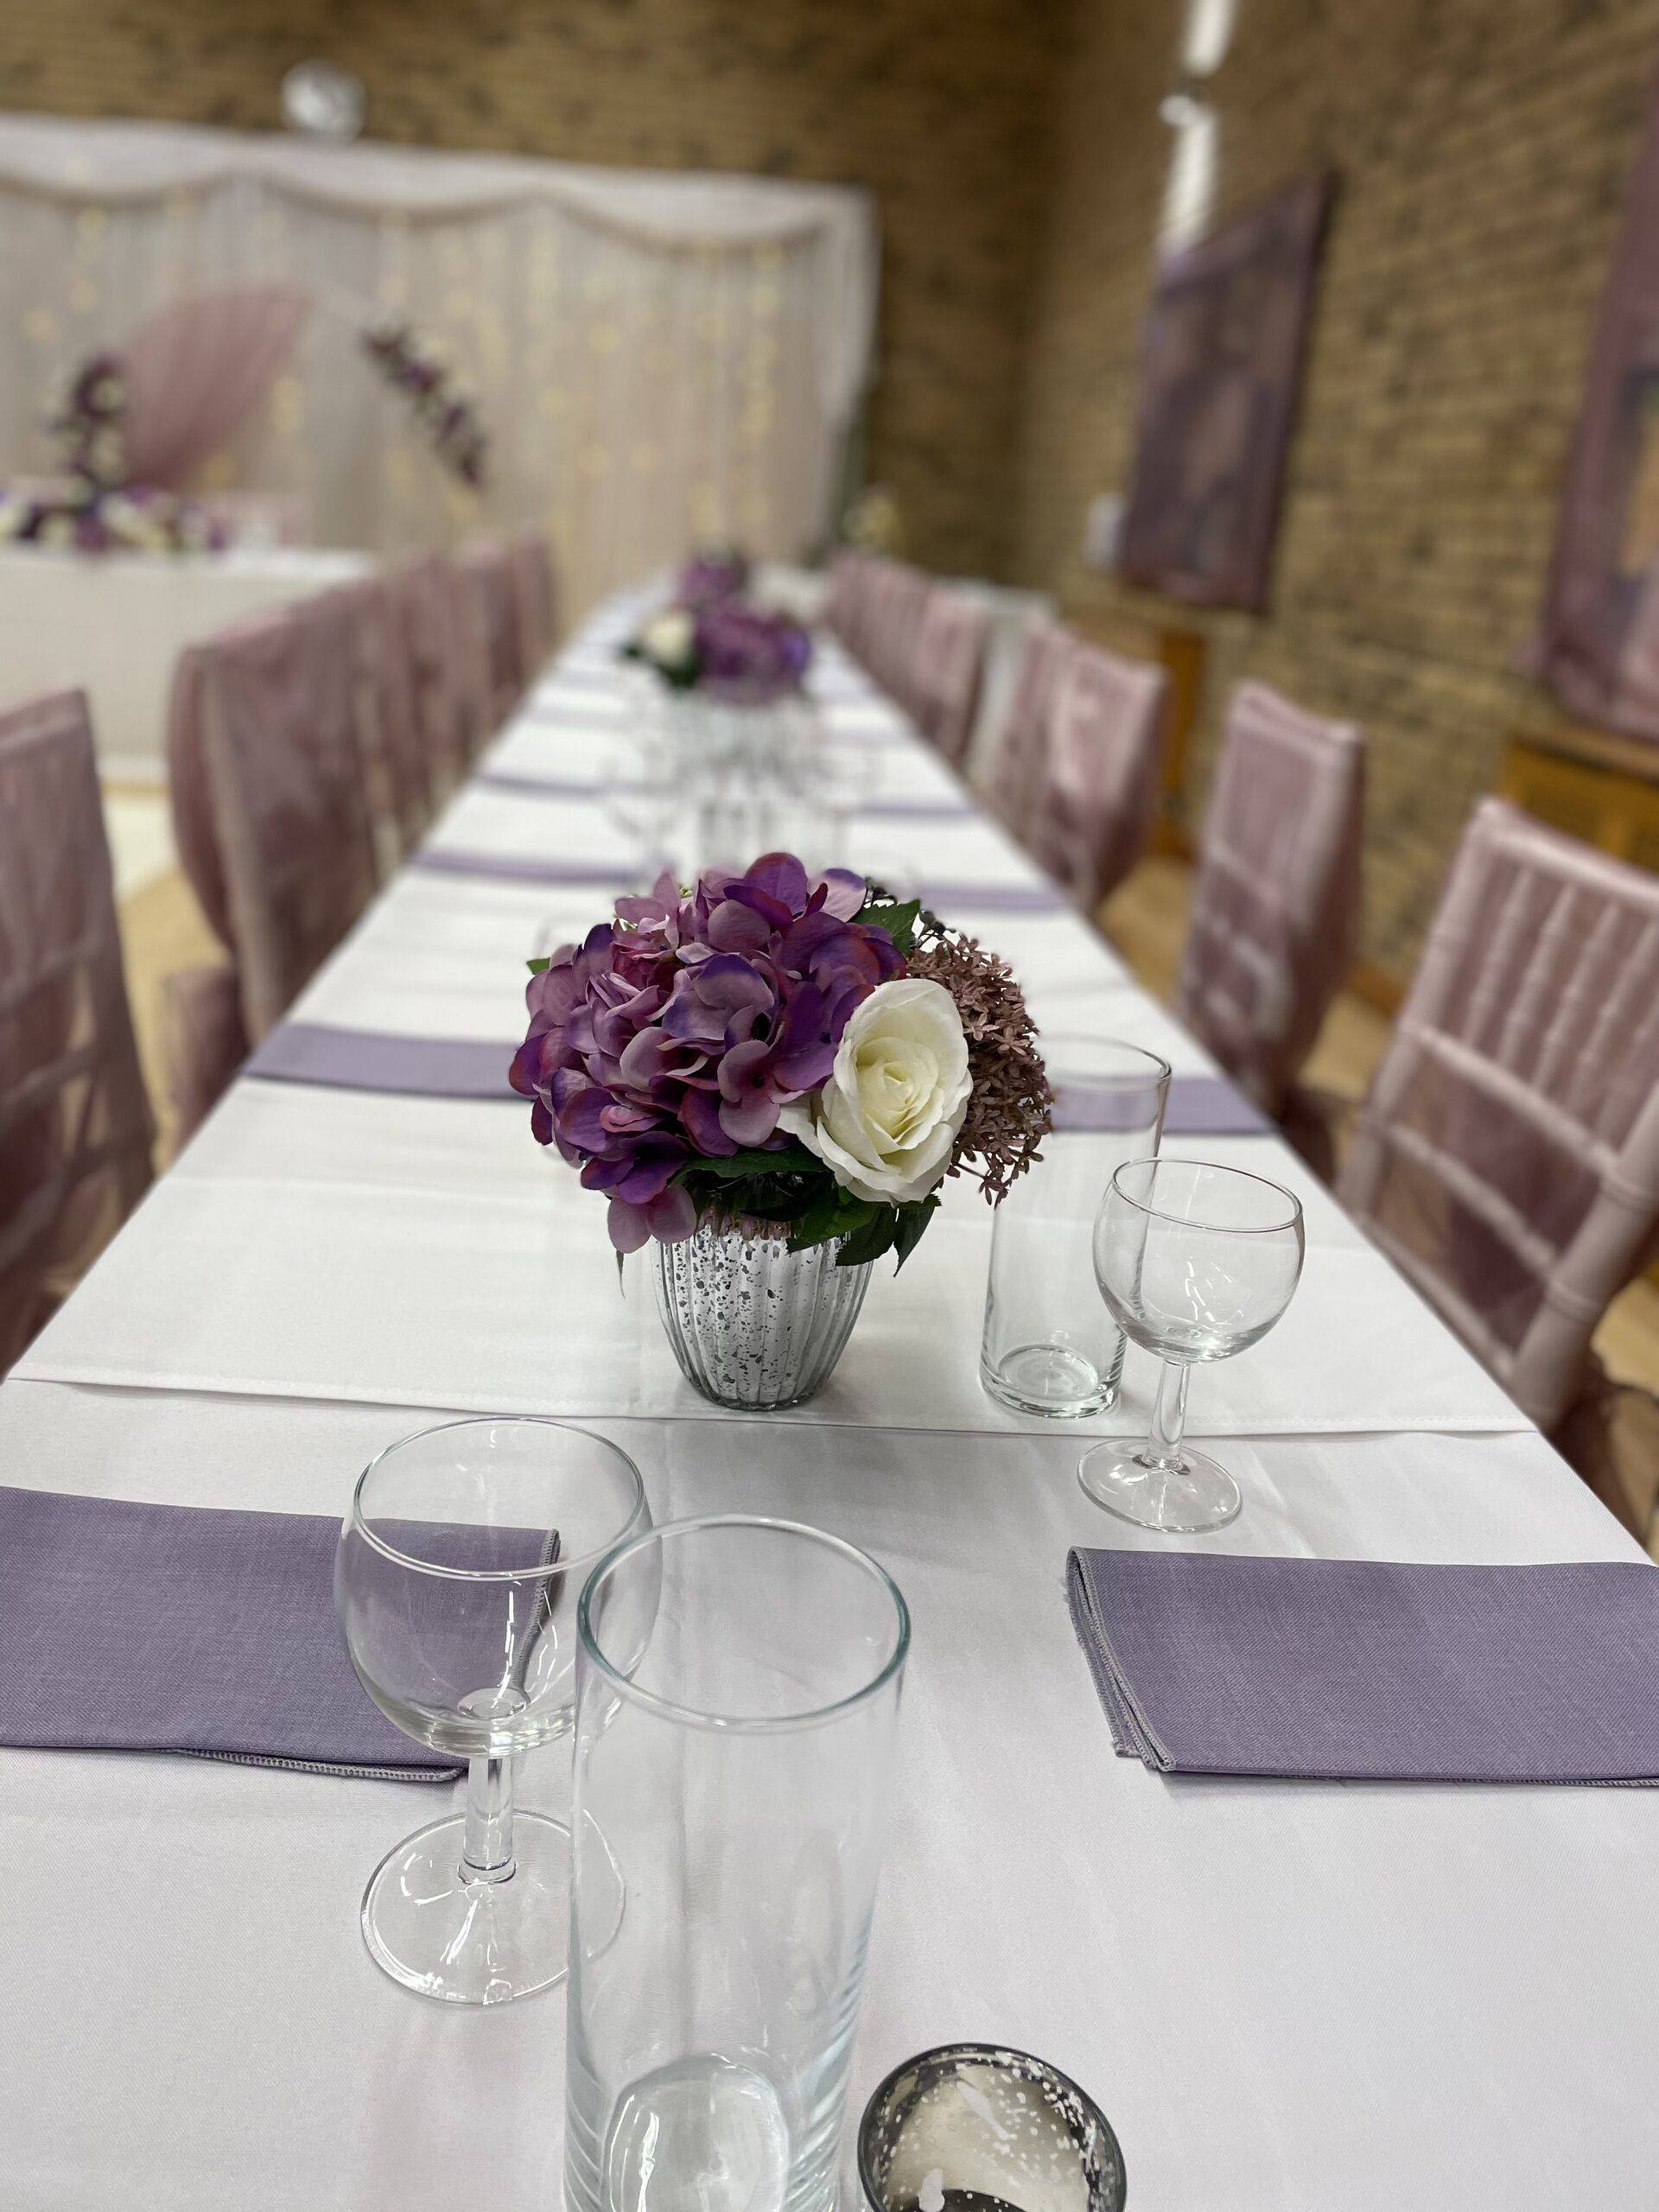 a long table with purple and white flowers in a vase.